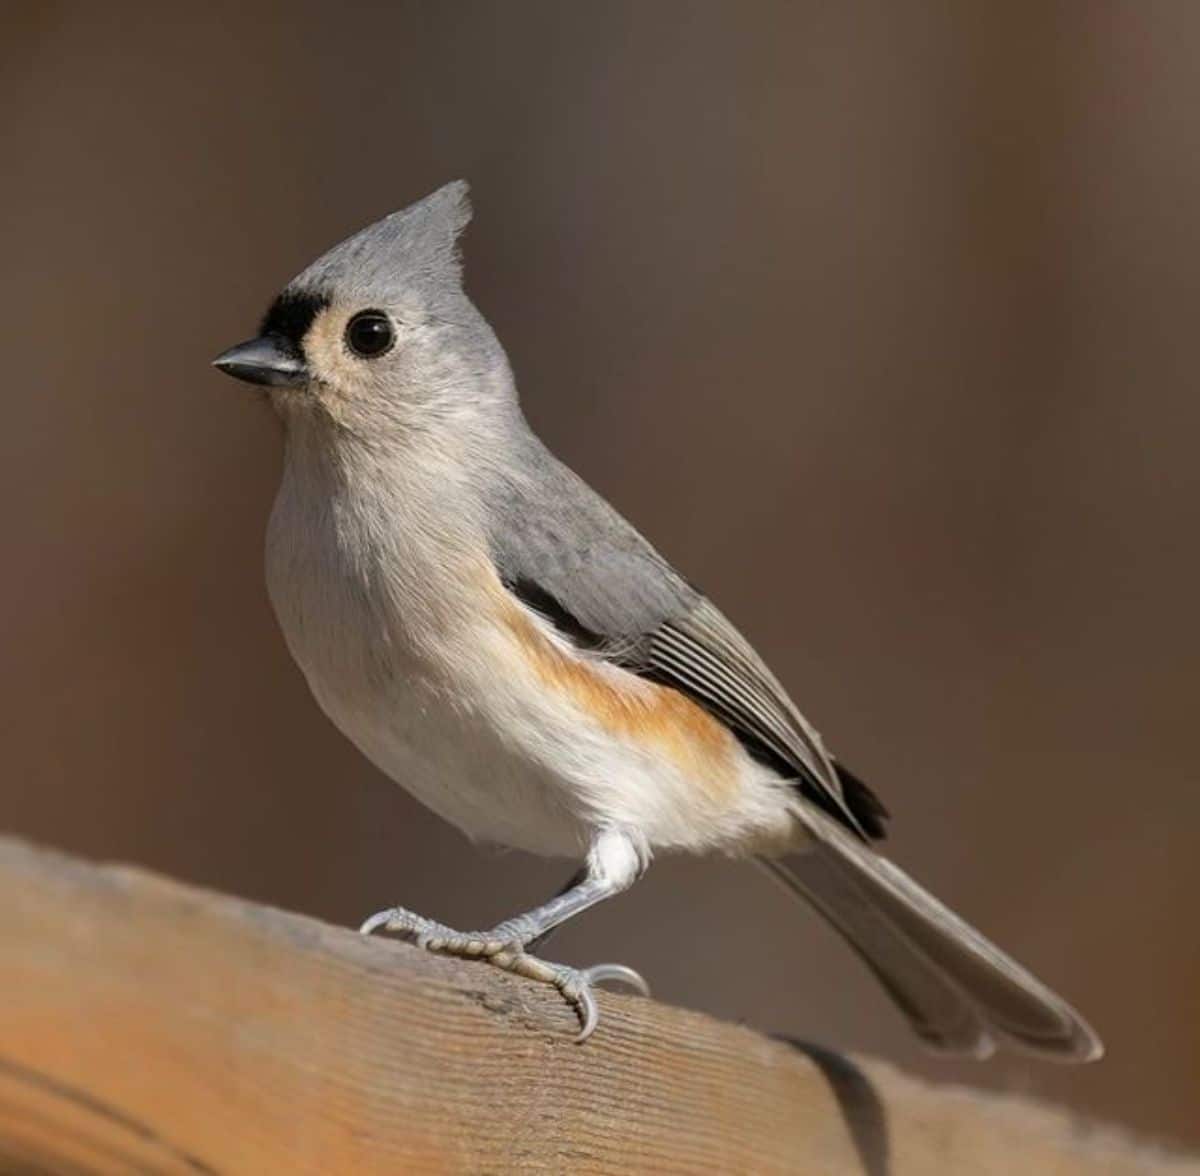 A cute Tufted Titmouse perched on a wooden board.